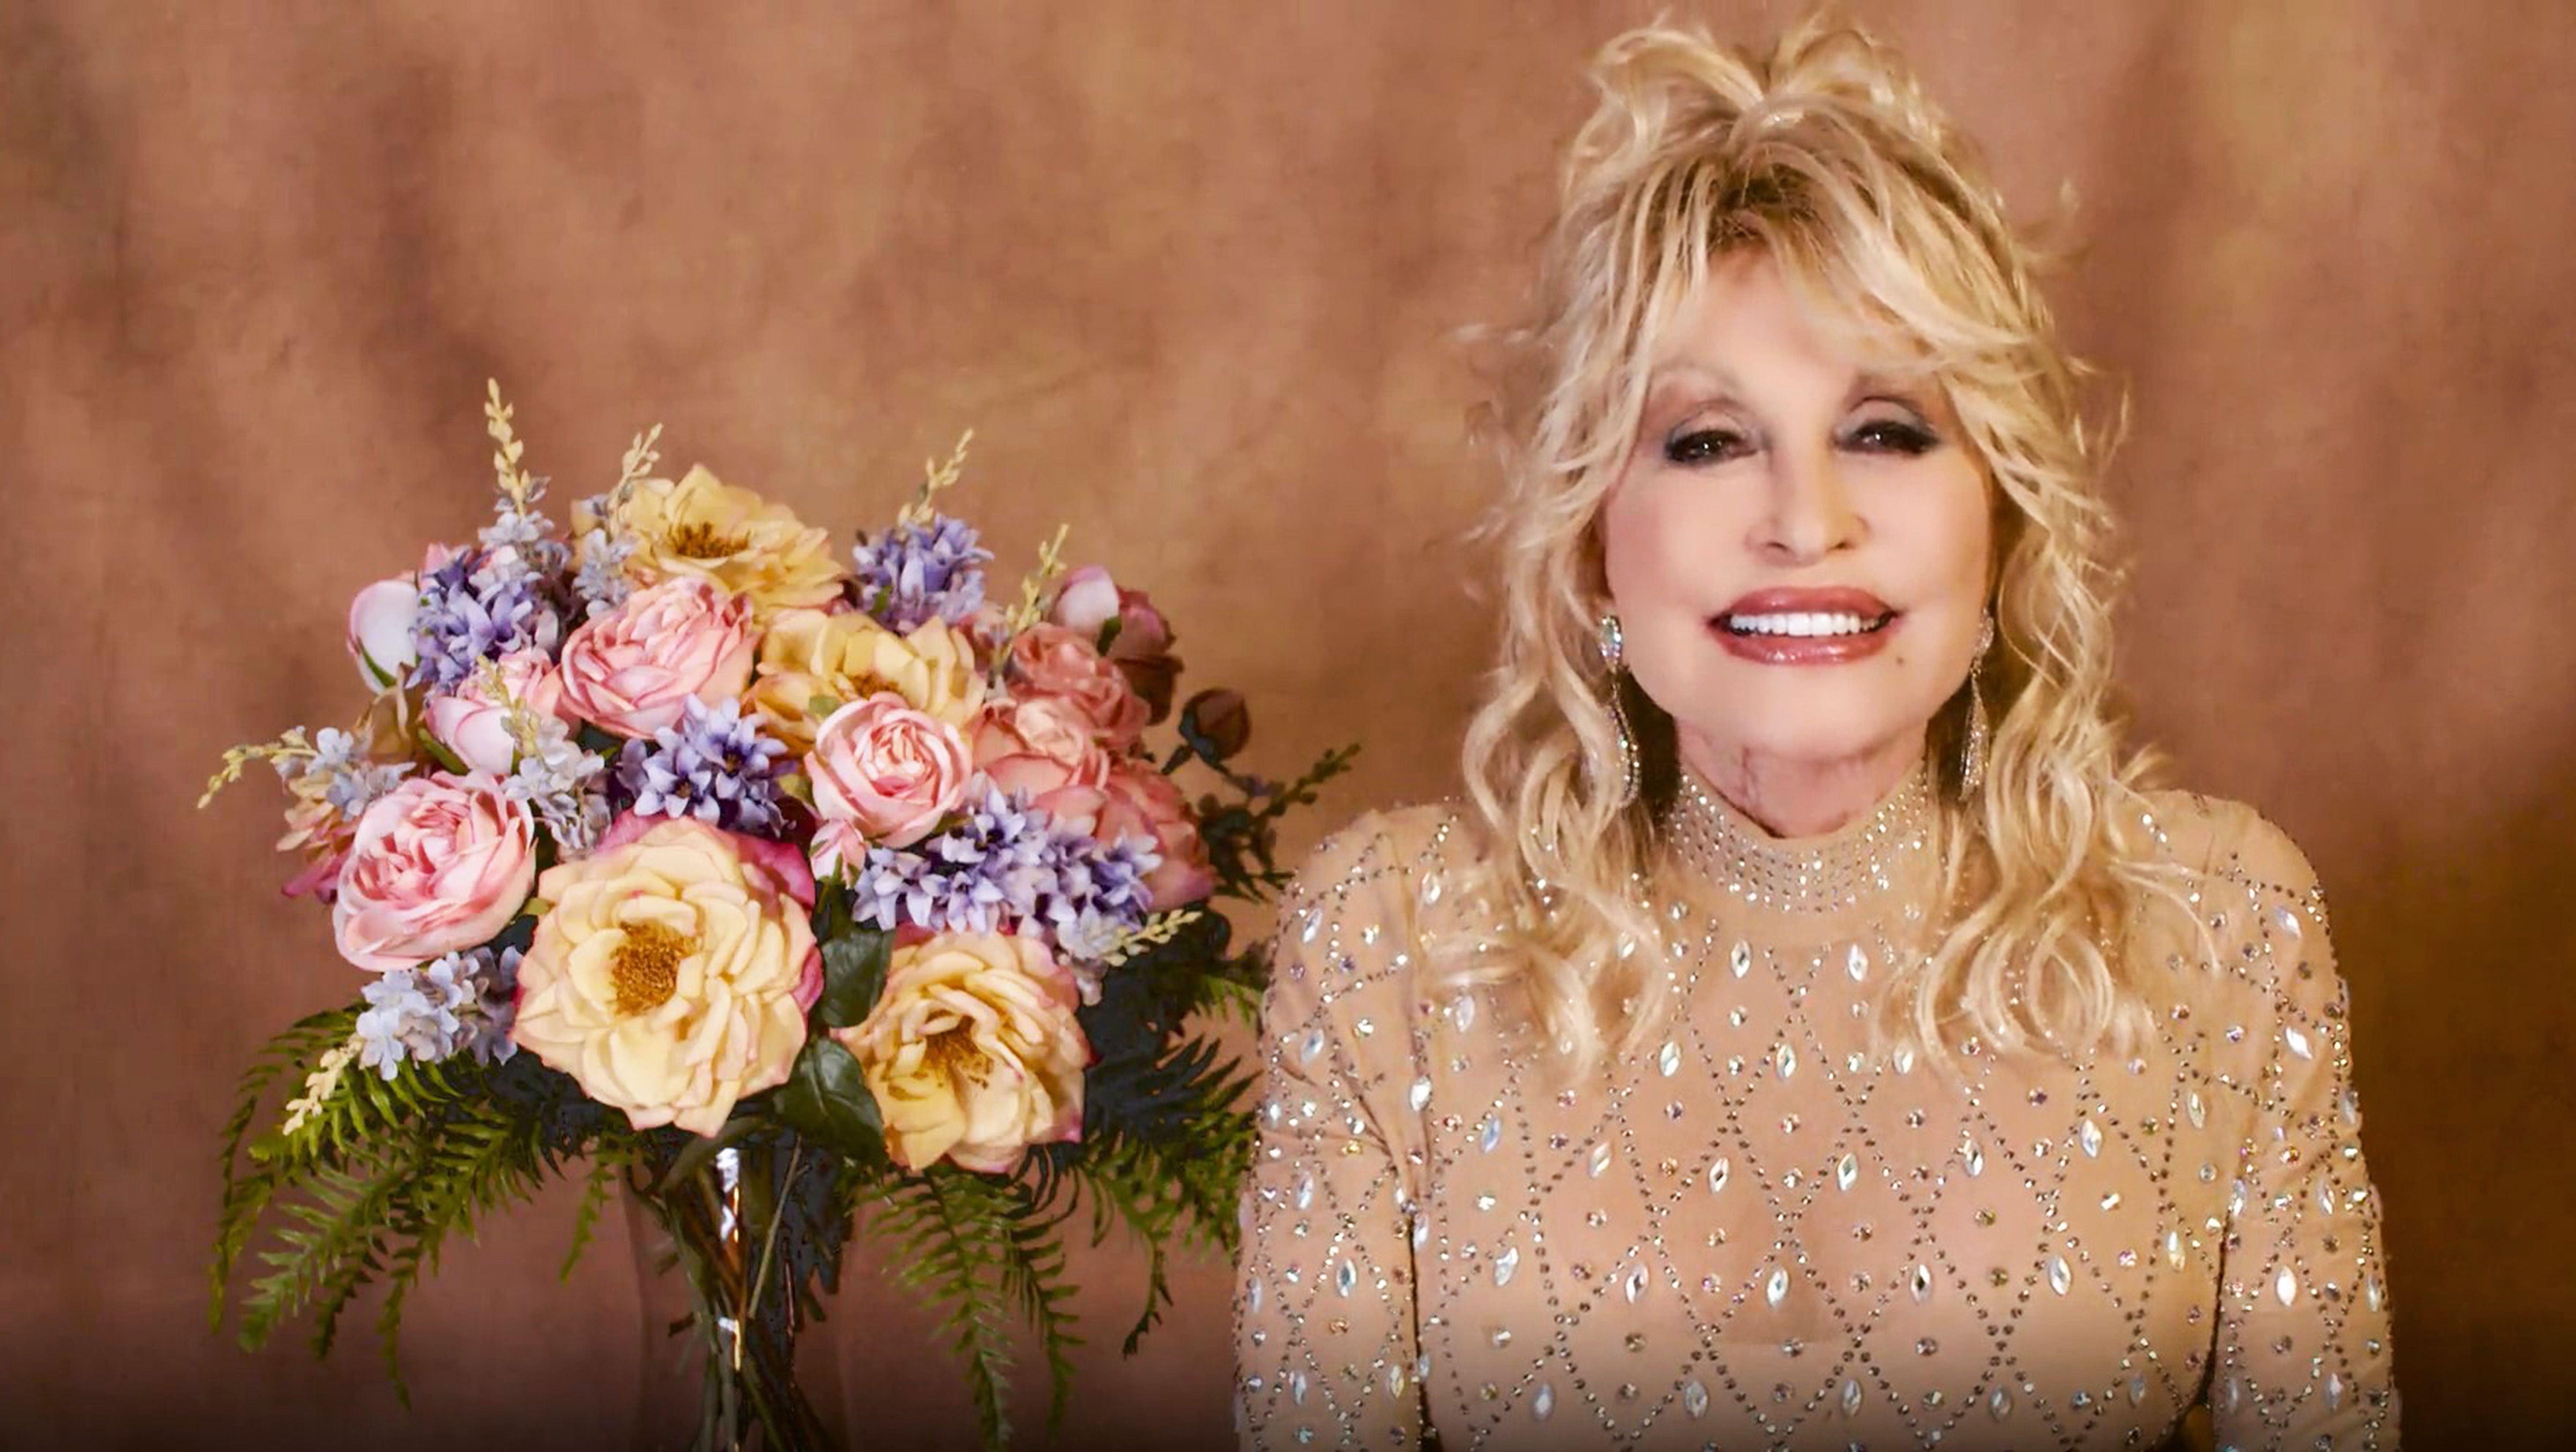 Dolly Parton age 75 wears a sparkly gown in a screengrab for the ACM awards